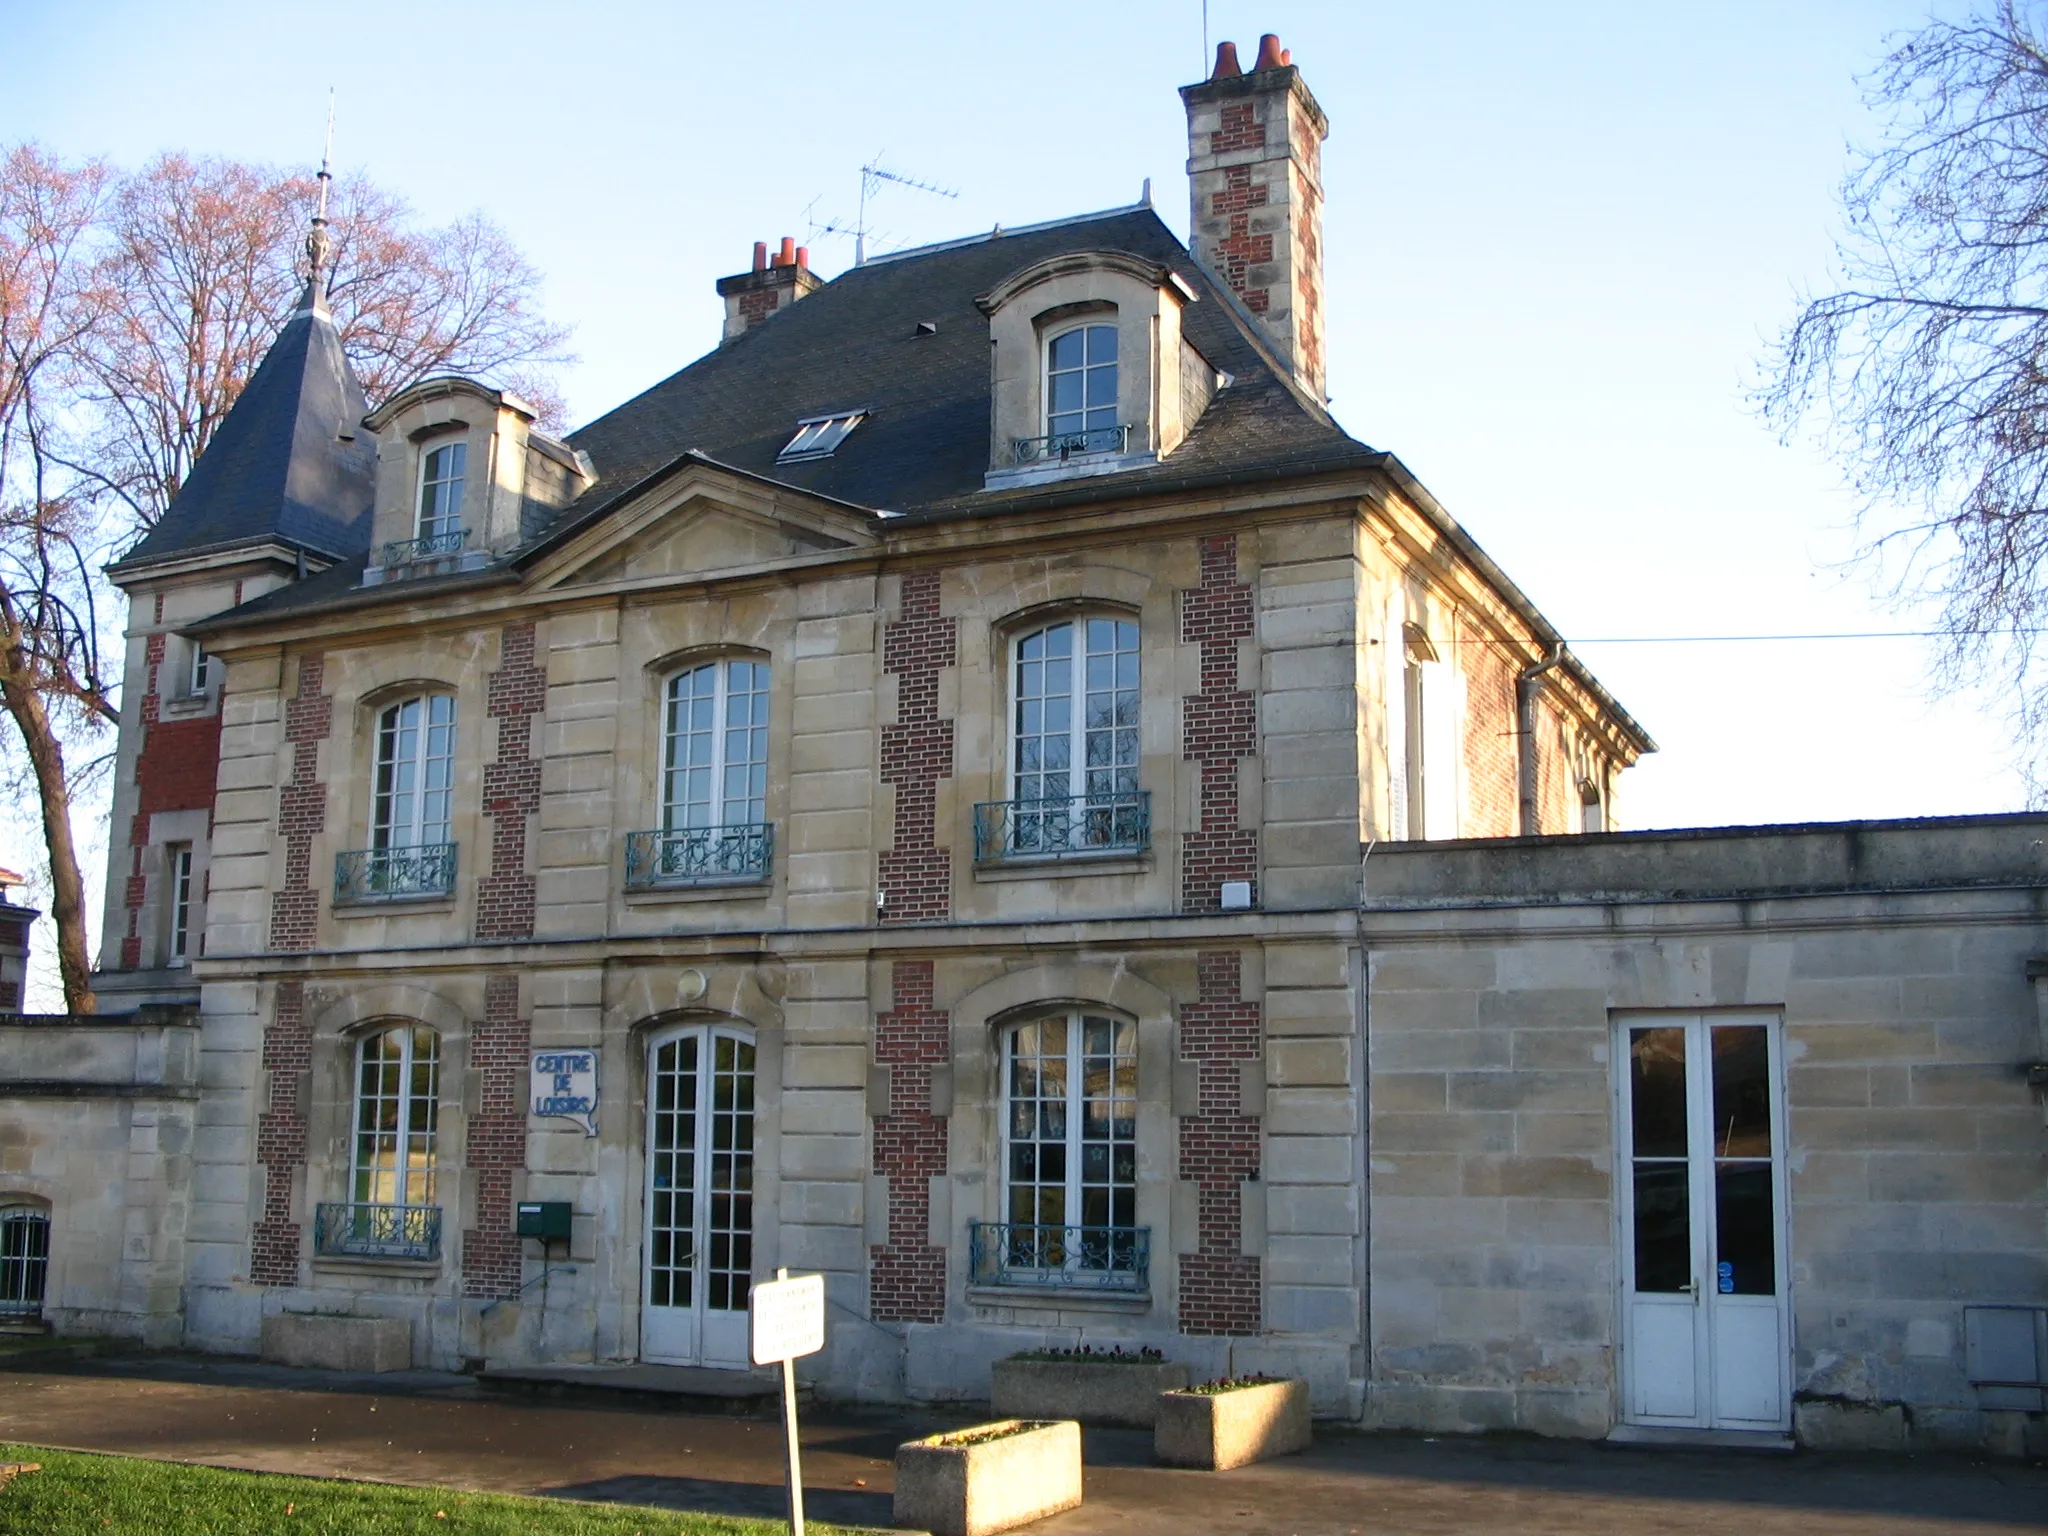 Photo showing: The old building hosting the Centre de Loisirs of Chambly, Oise, France.